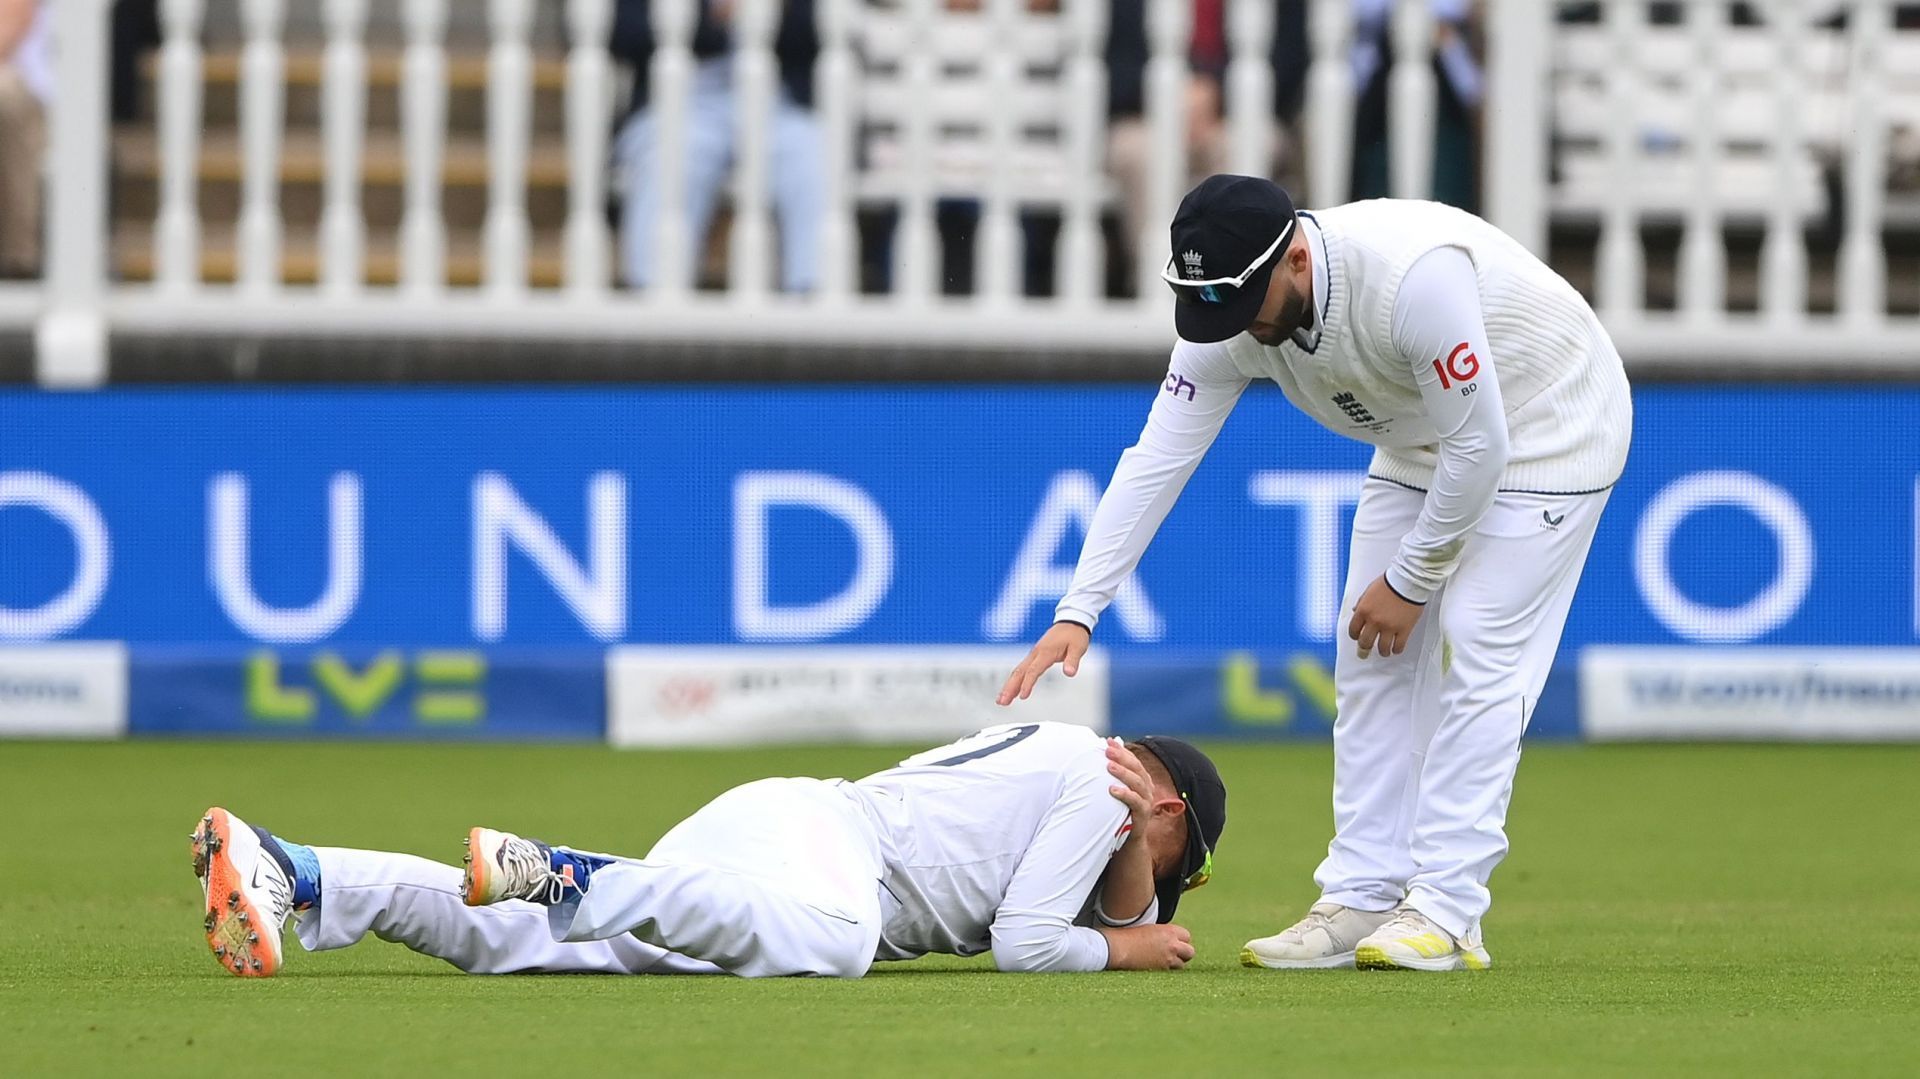 An injury to Ollie Pope made the day worse for the fielding side. (Pic: Getty Images)